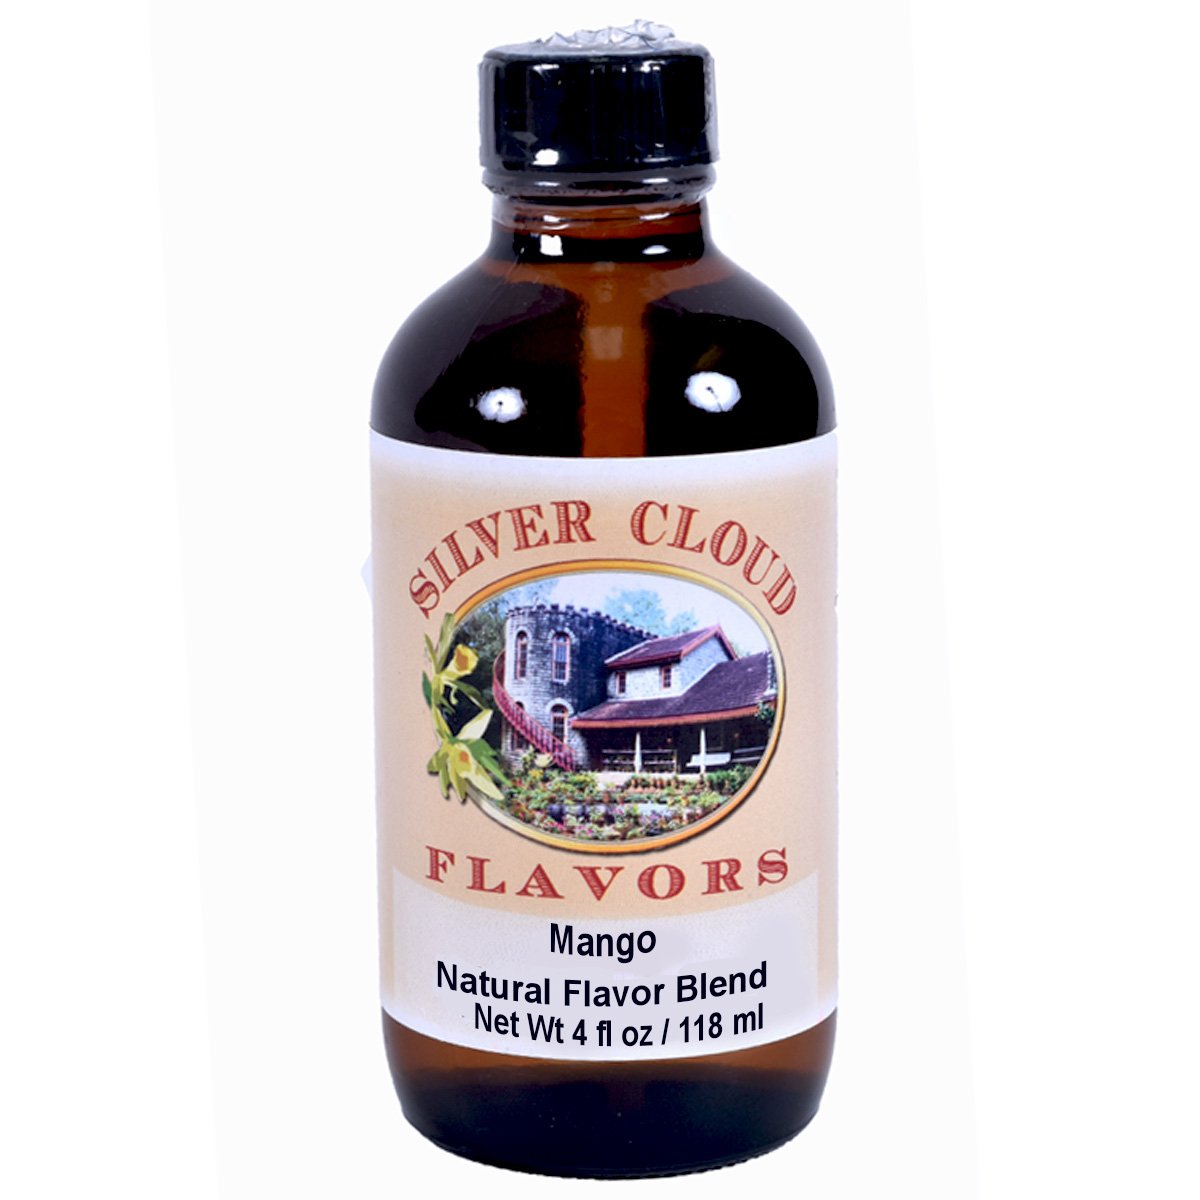 Mango Type, Natural Flavor Blend Silver Cloud Extract - Bake Supply Plus